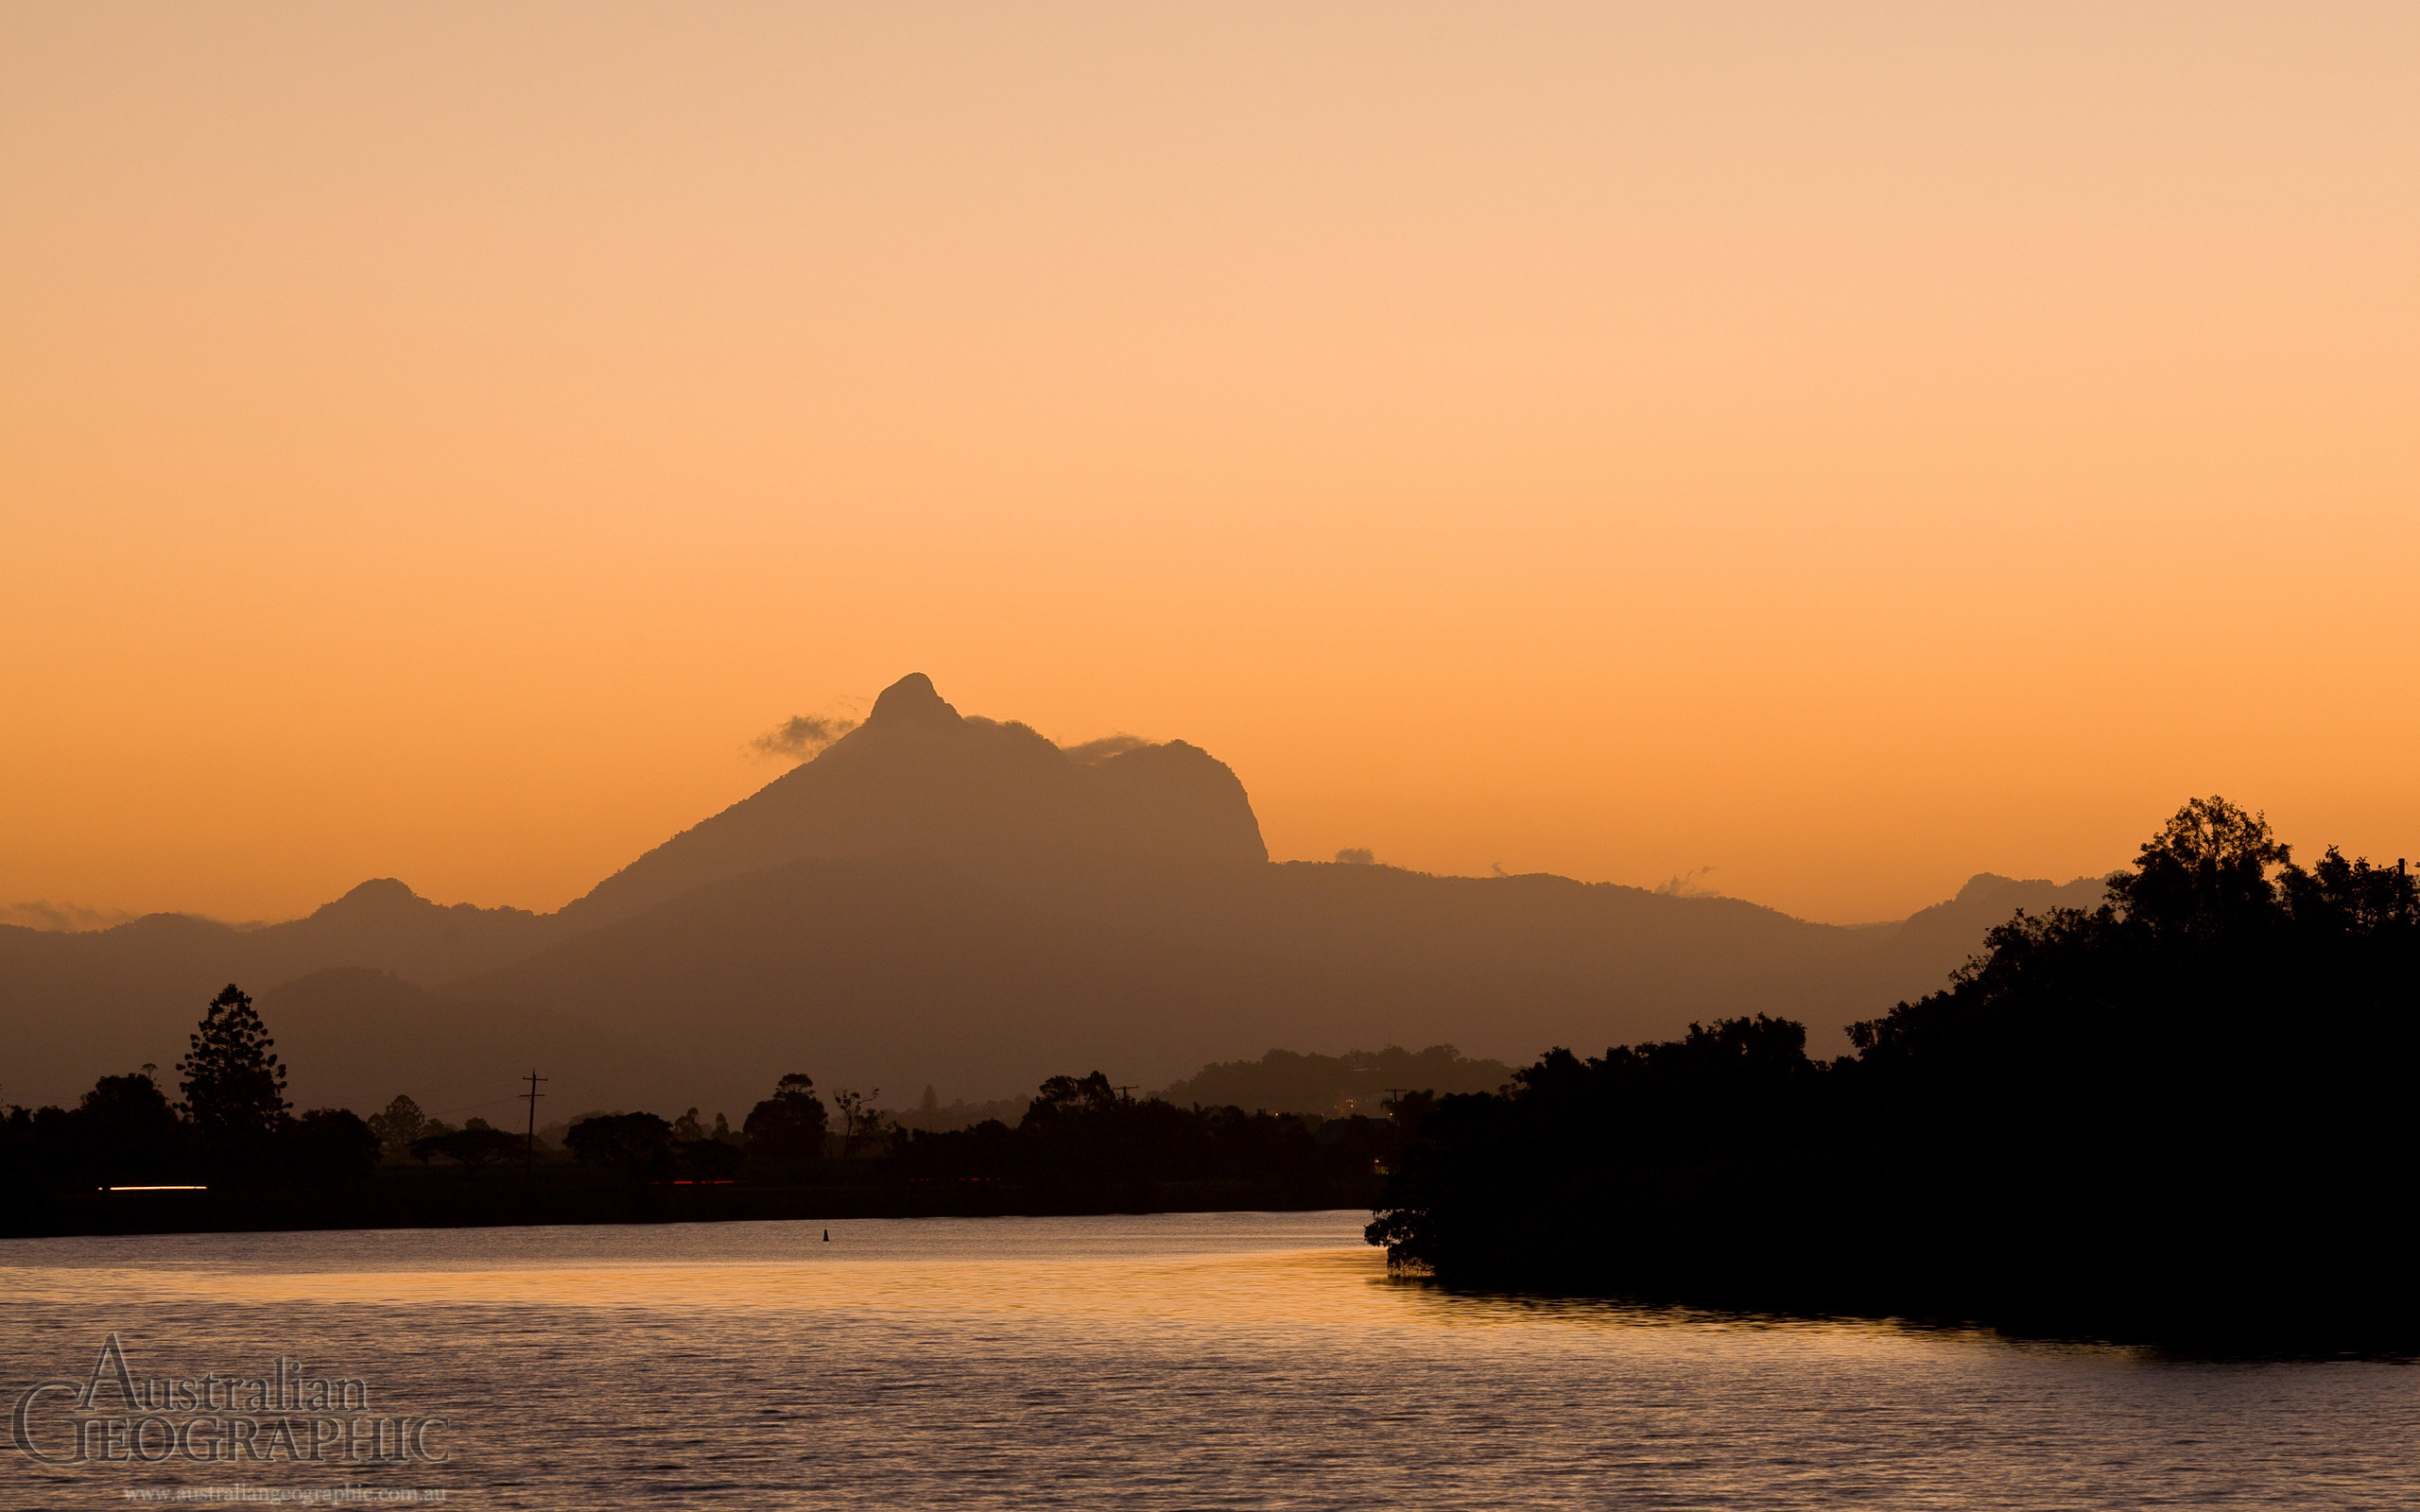 2560x1600 Wallpapers. Images of Australia: Mt Warning, New South Wales